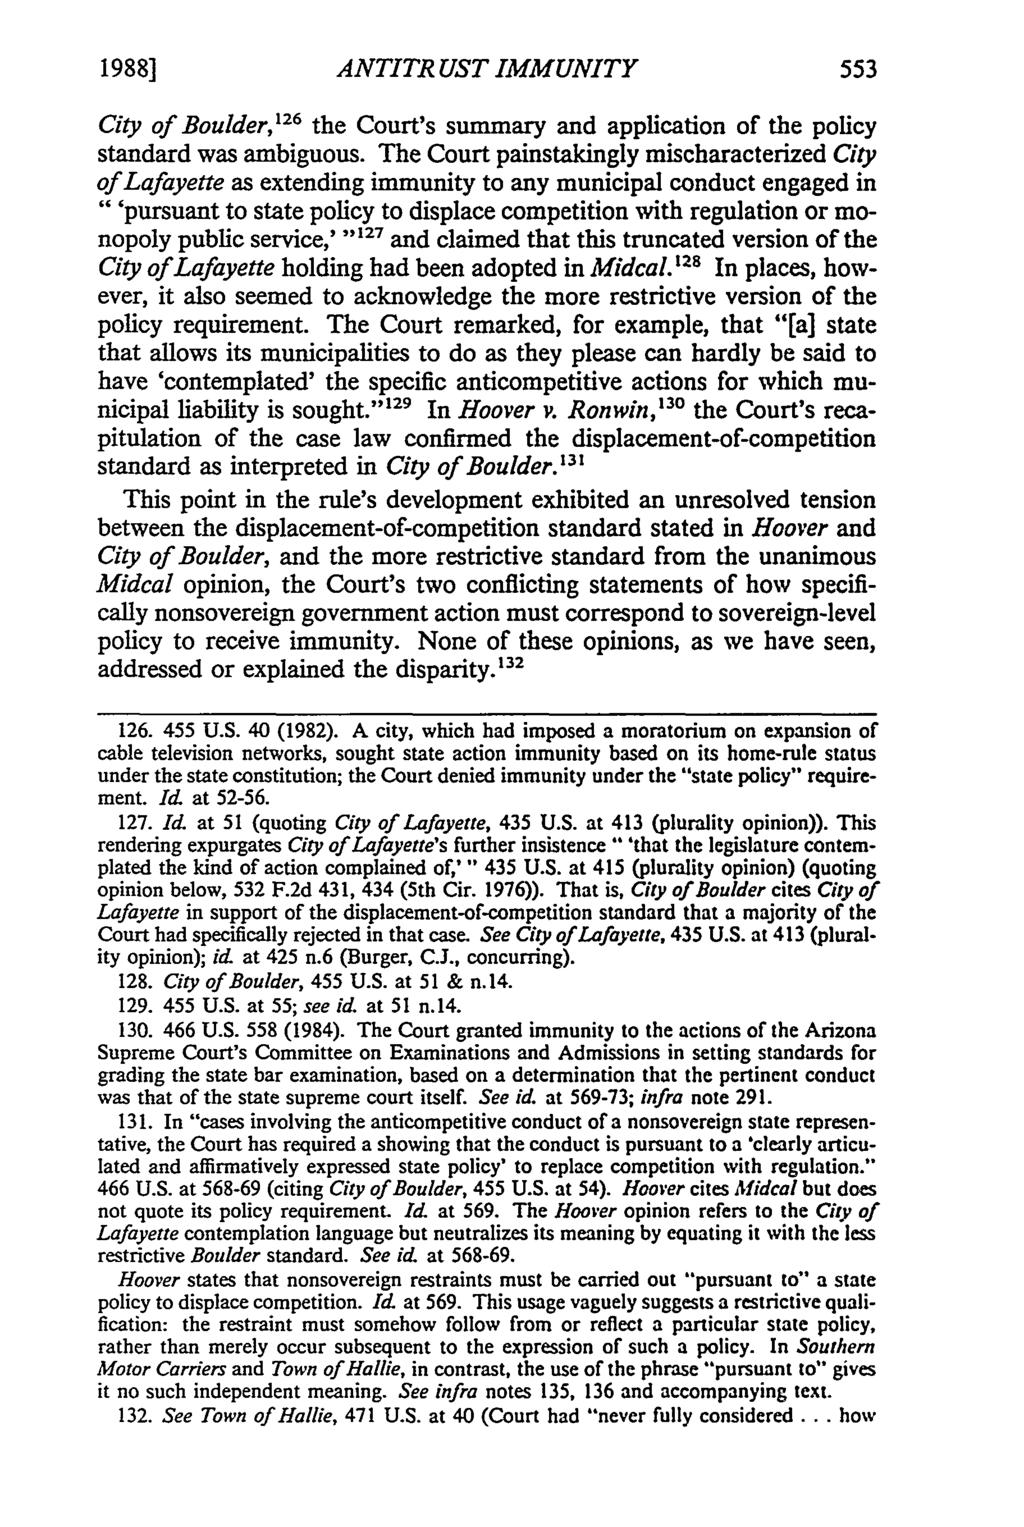 1988] ANTITRUST IMMUNITY City of Boulder, 126 the Court's summary and application of the policy standard was ambiguous.